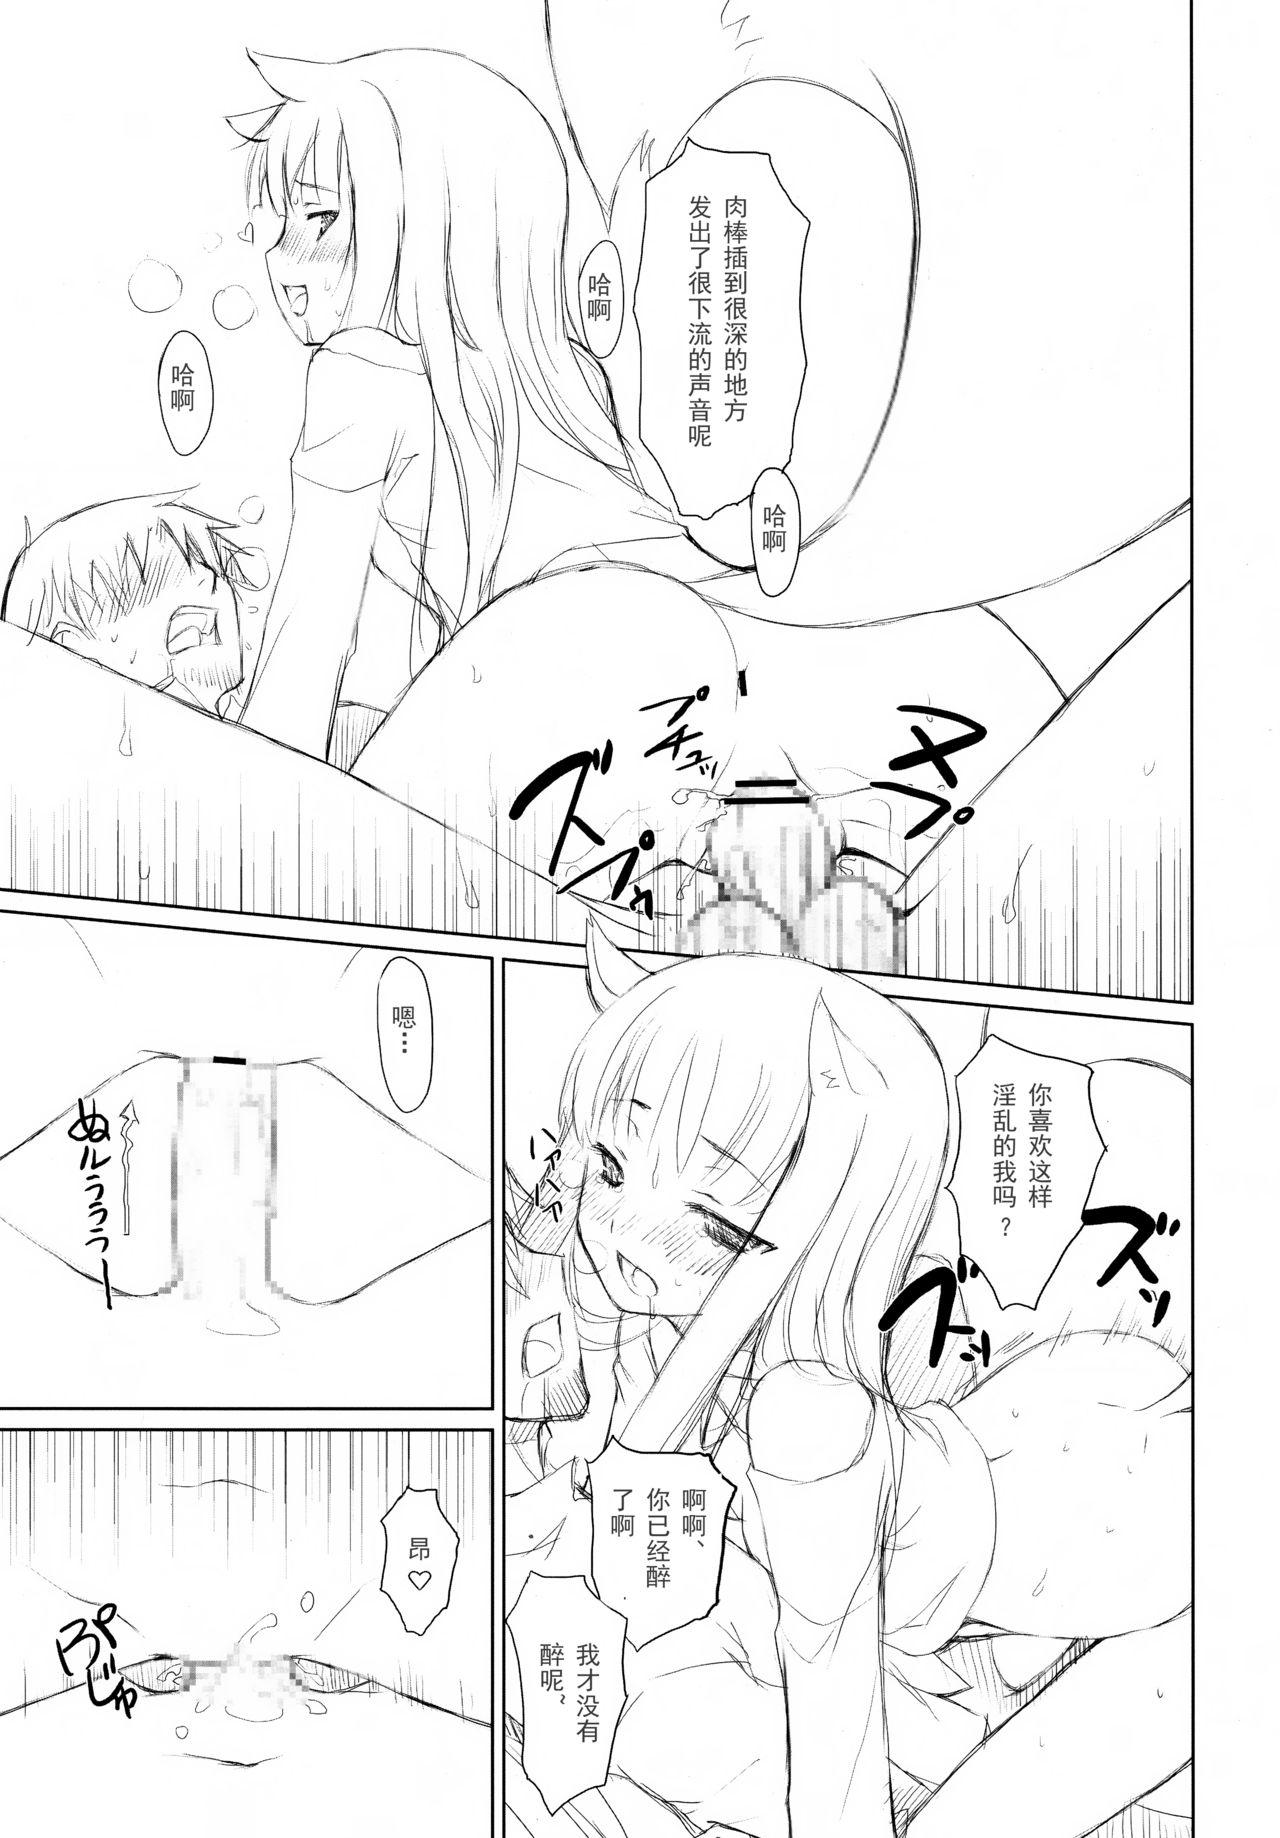 Sislovesme Ookami to Gekishinryou - Spice and wolf Super - Page 12